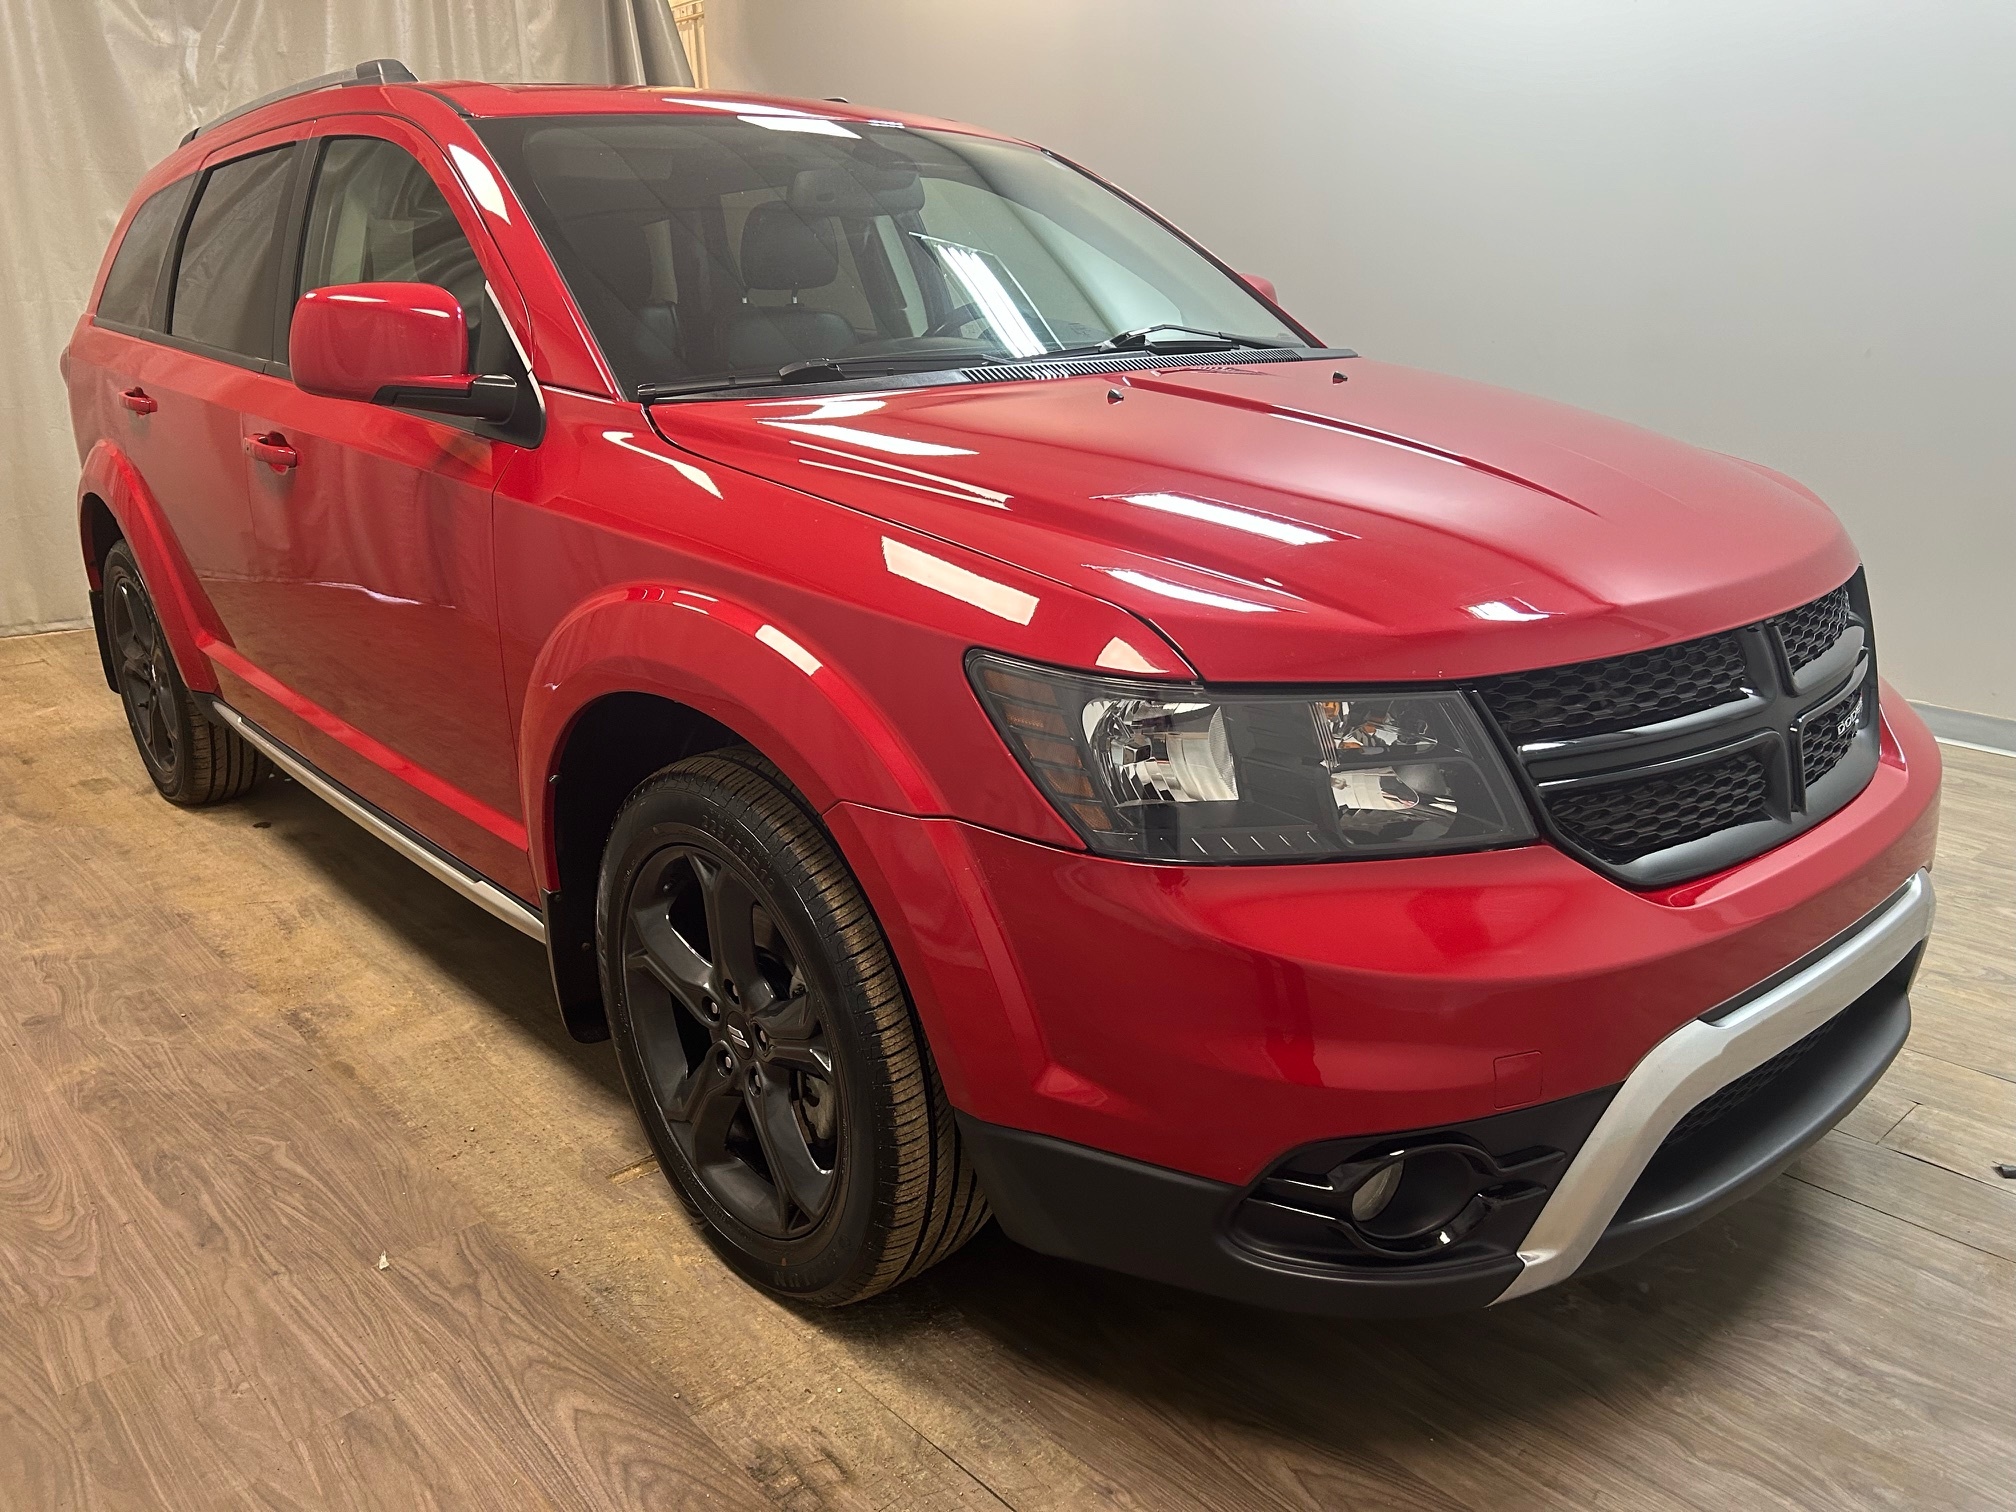 2019 Dodge Journey CROSSROAD AWD | 3RD ROW SEATING | NAVIGATION | REA